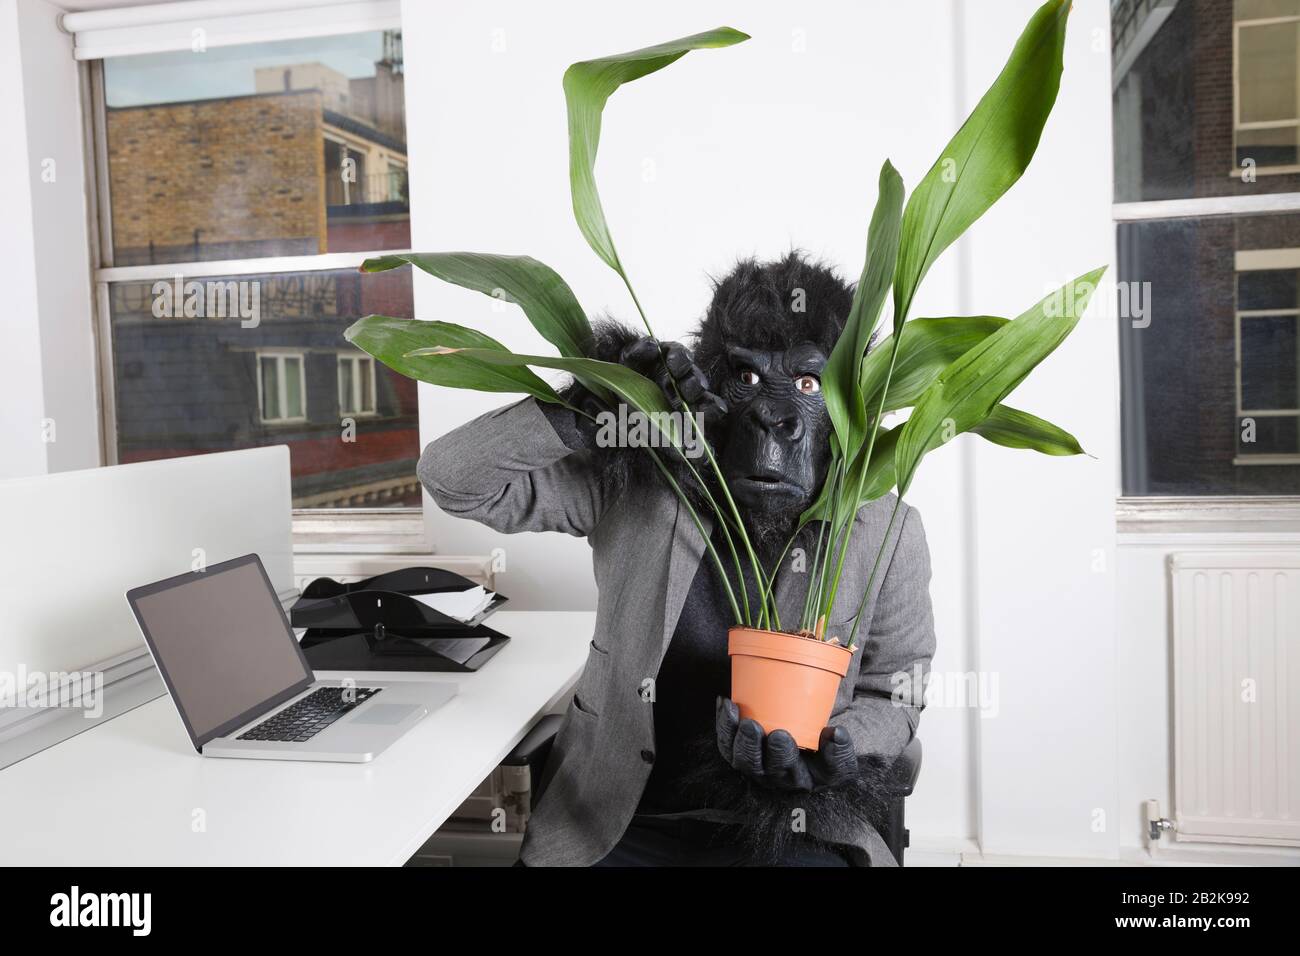 Frightful young man in gorilla mask looking through pot plant Stock Photo